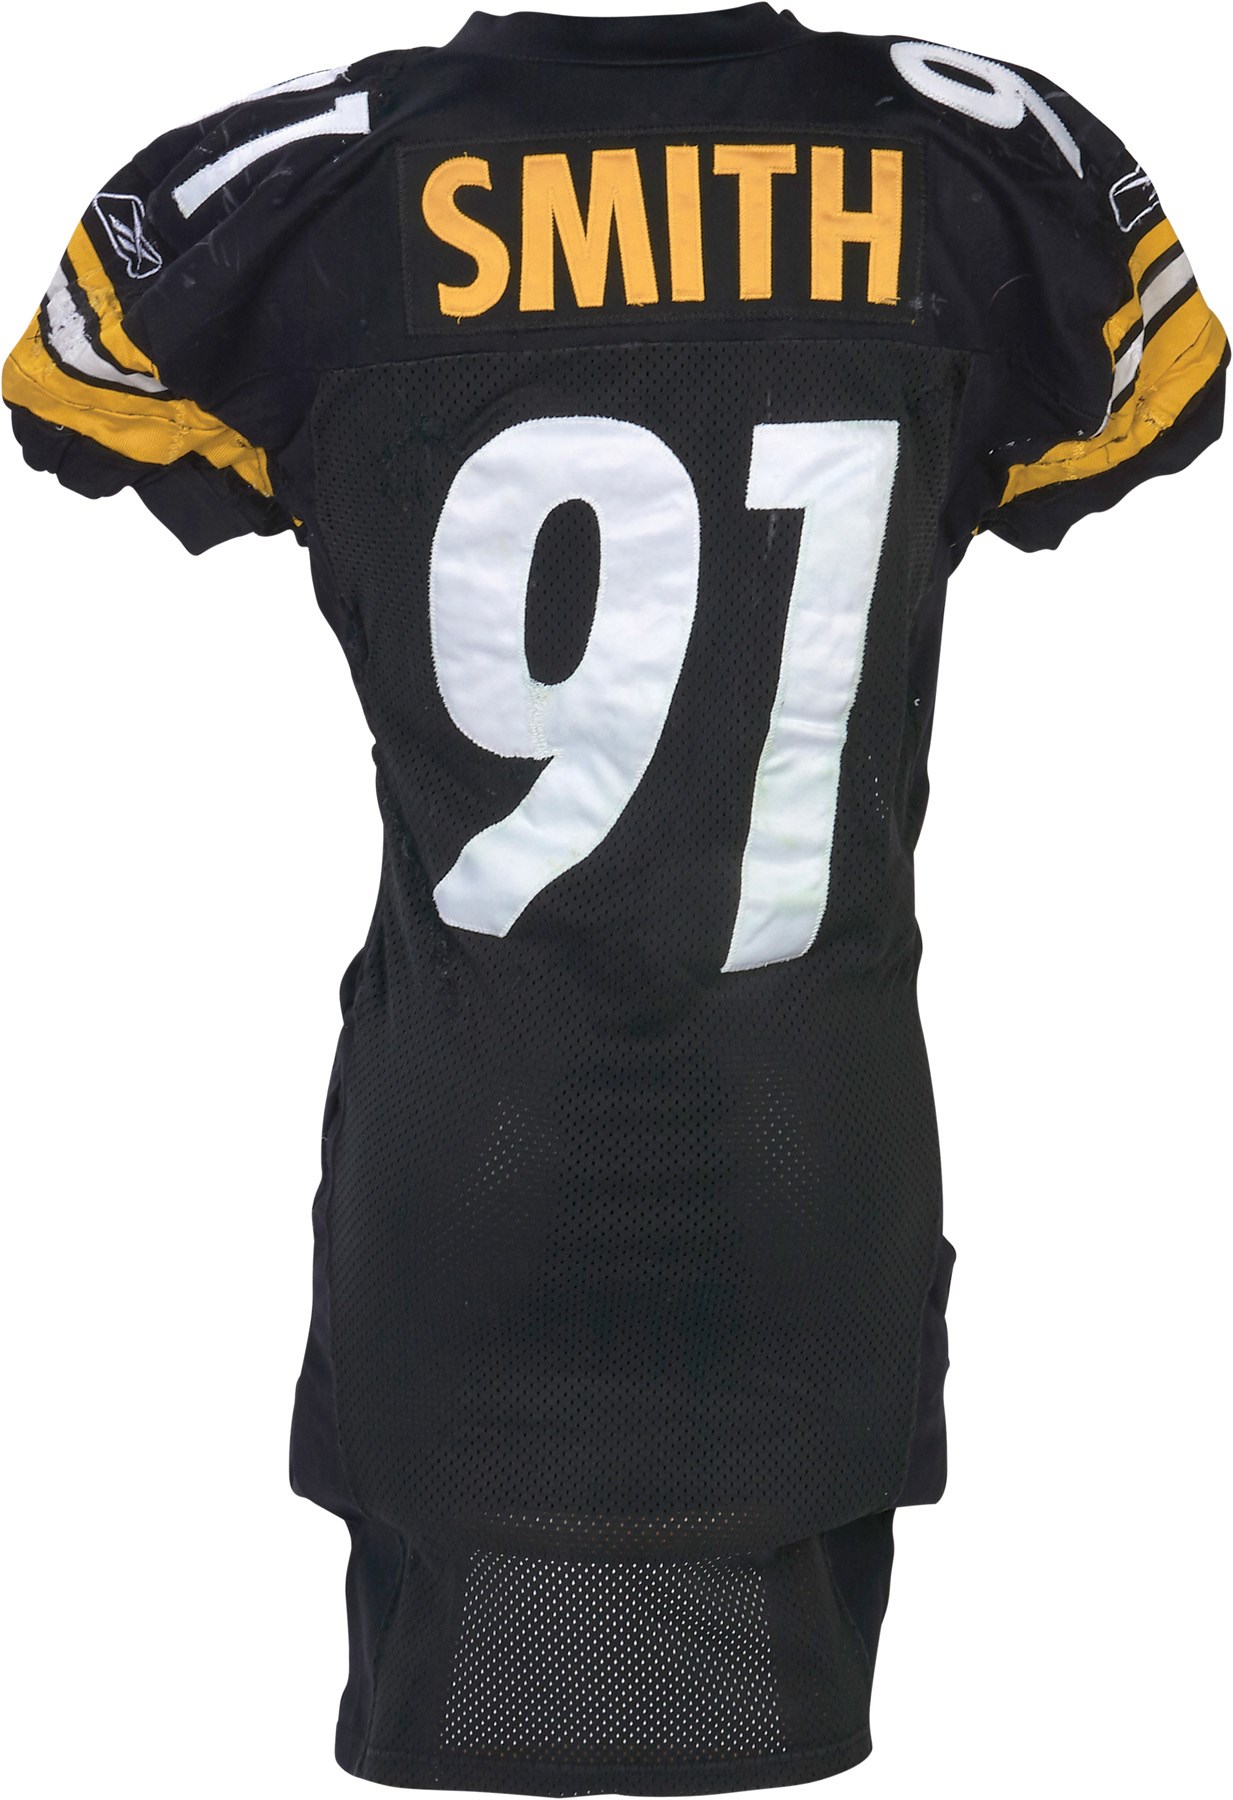 - 2002 Aaron Smith AFC Divisional Pittsburgh Steelers Game Worn Jersey (Photo-Matched)